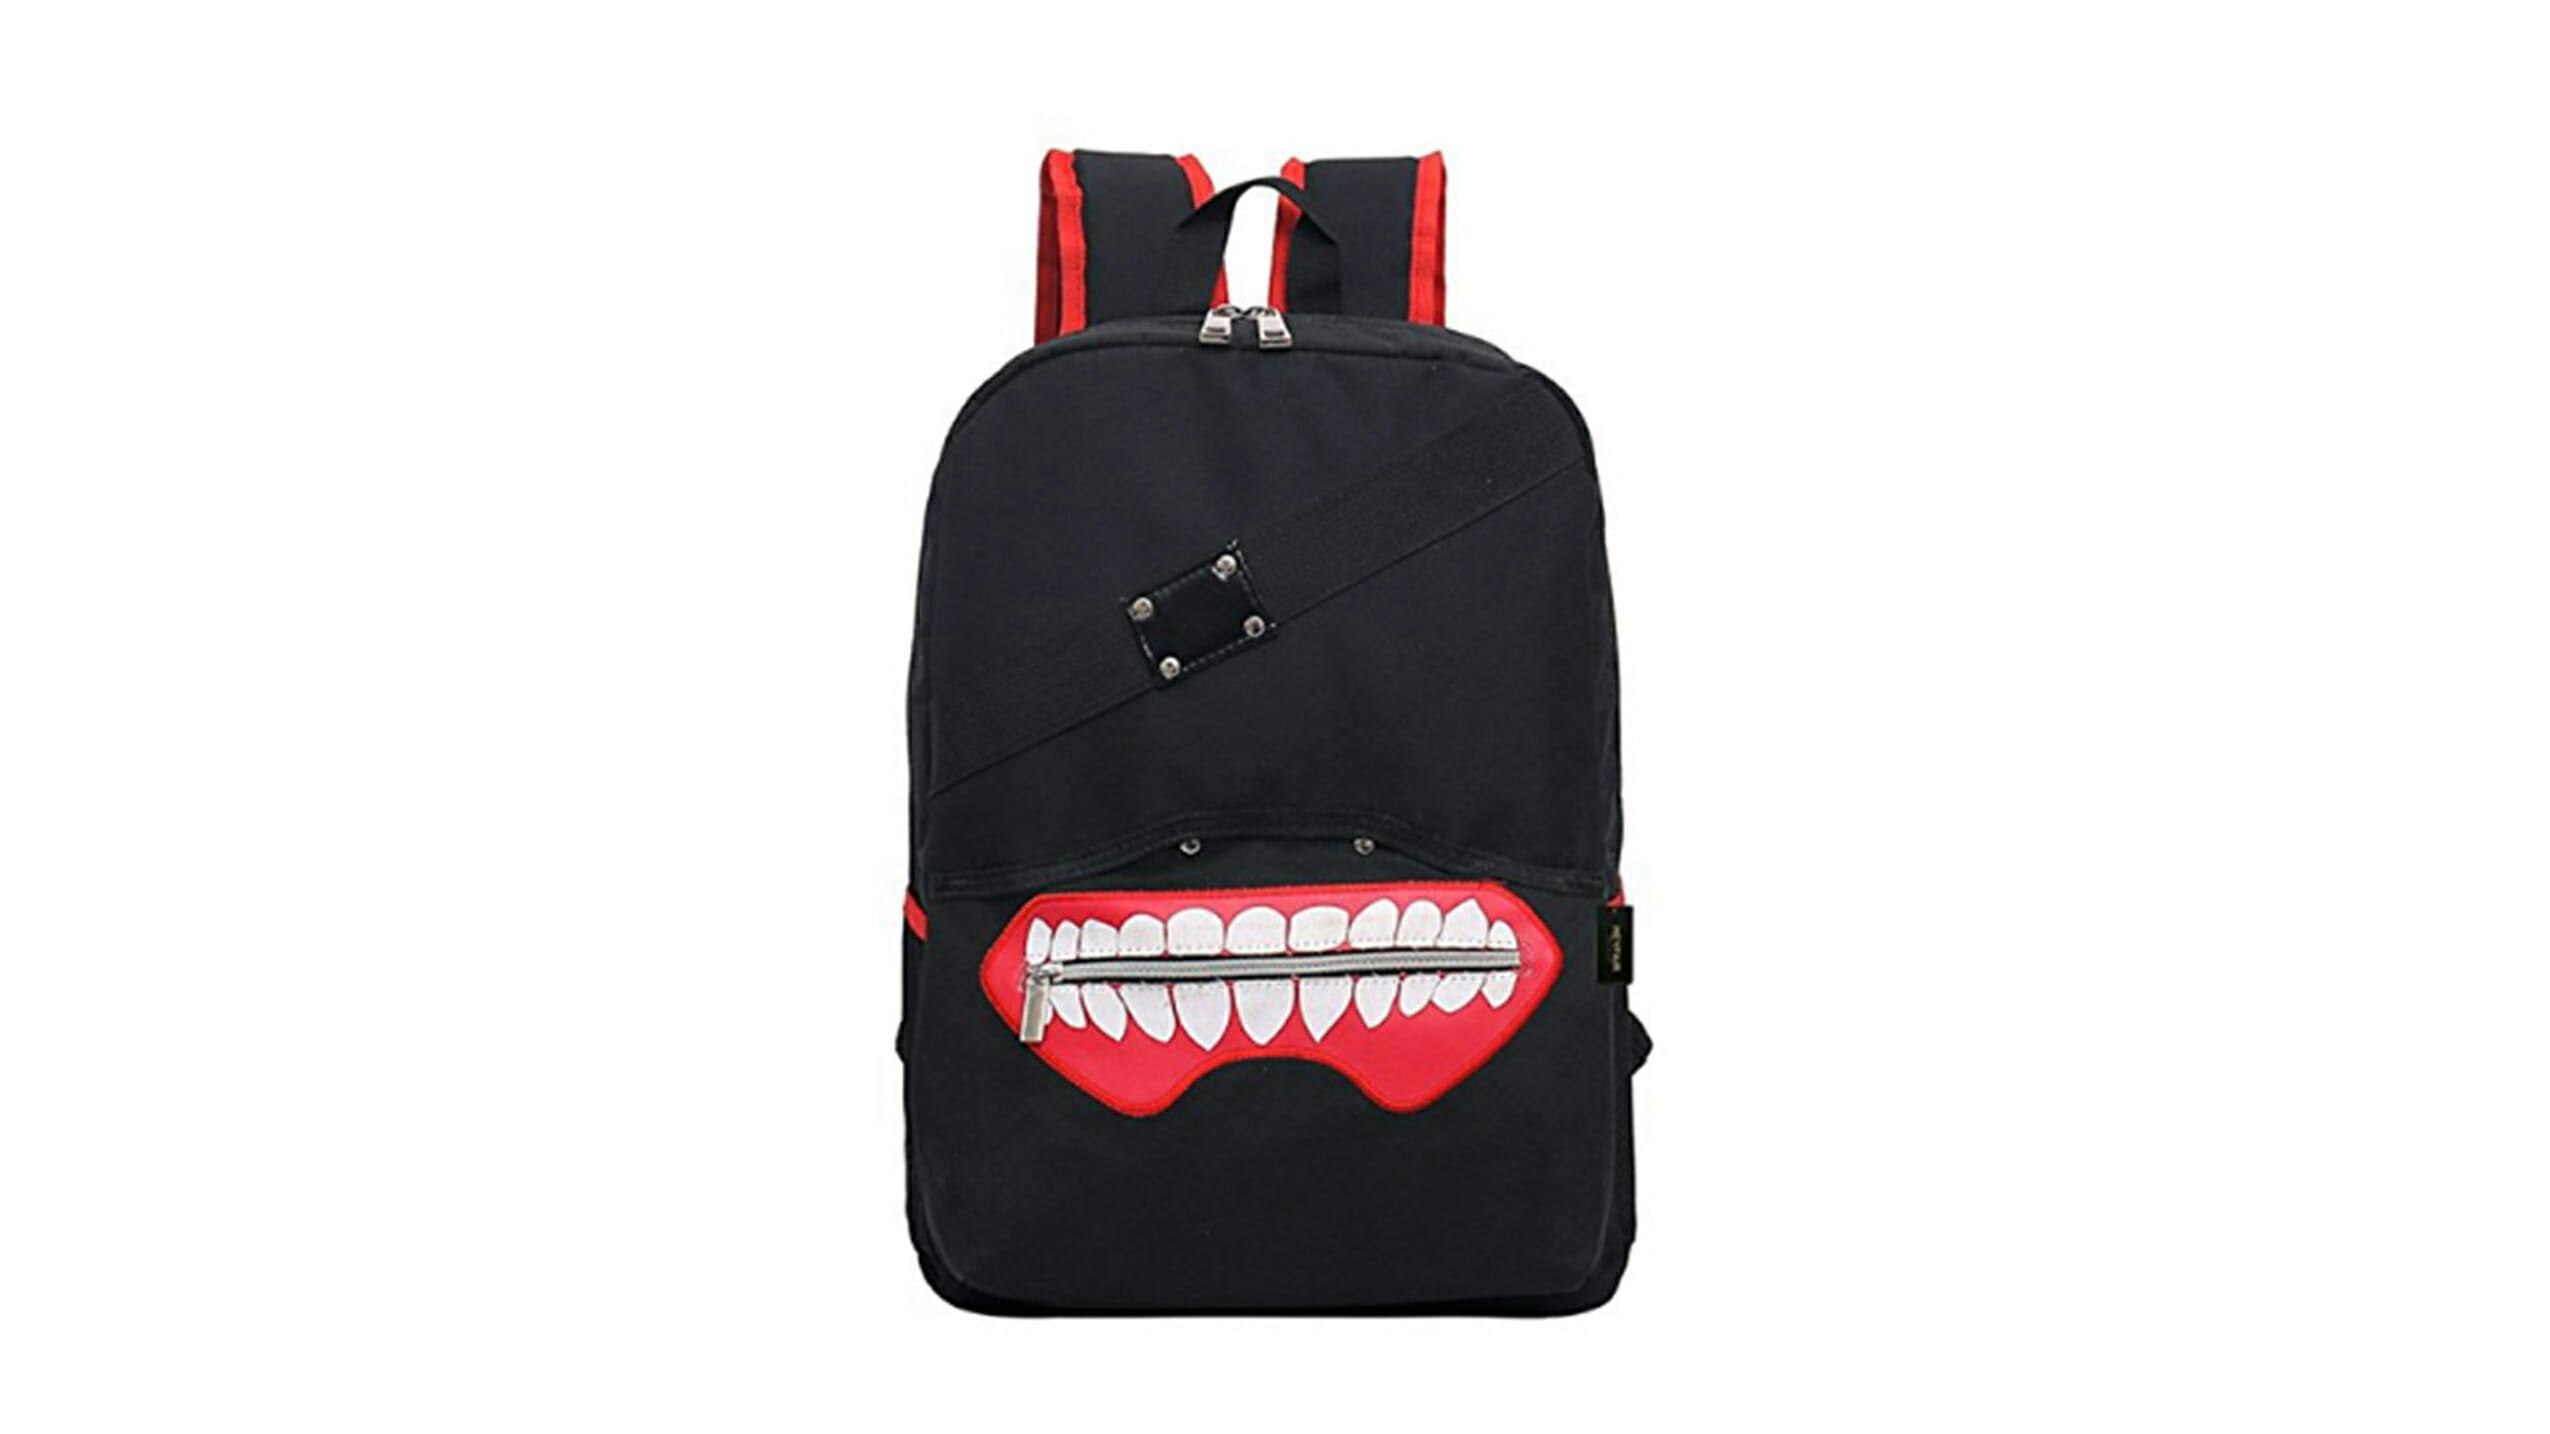 Senpai, please notice me (and these awesome anime backpacks)